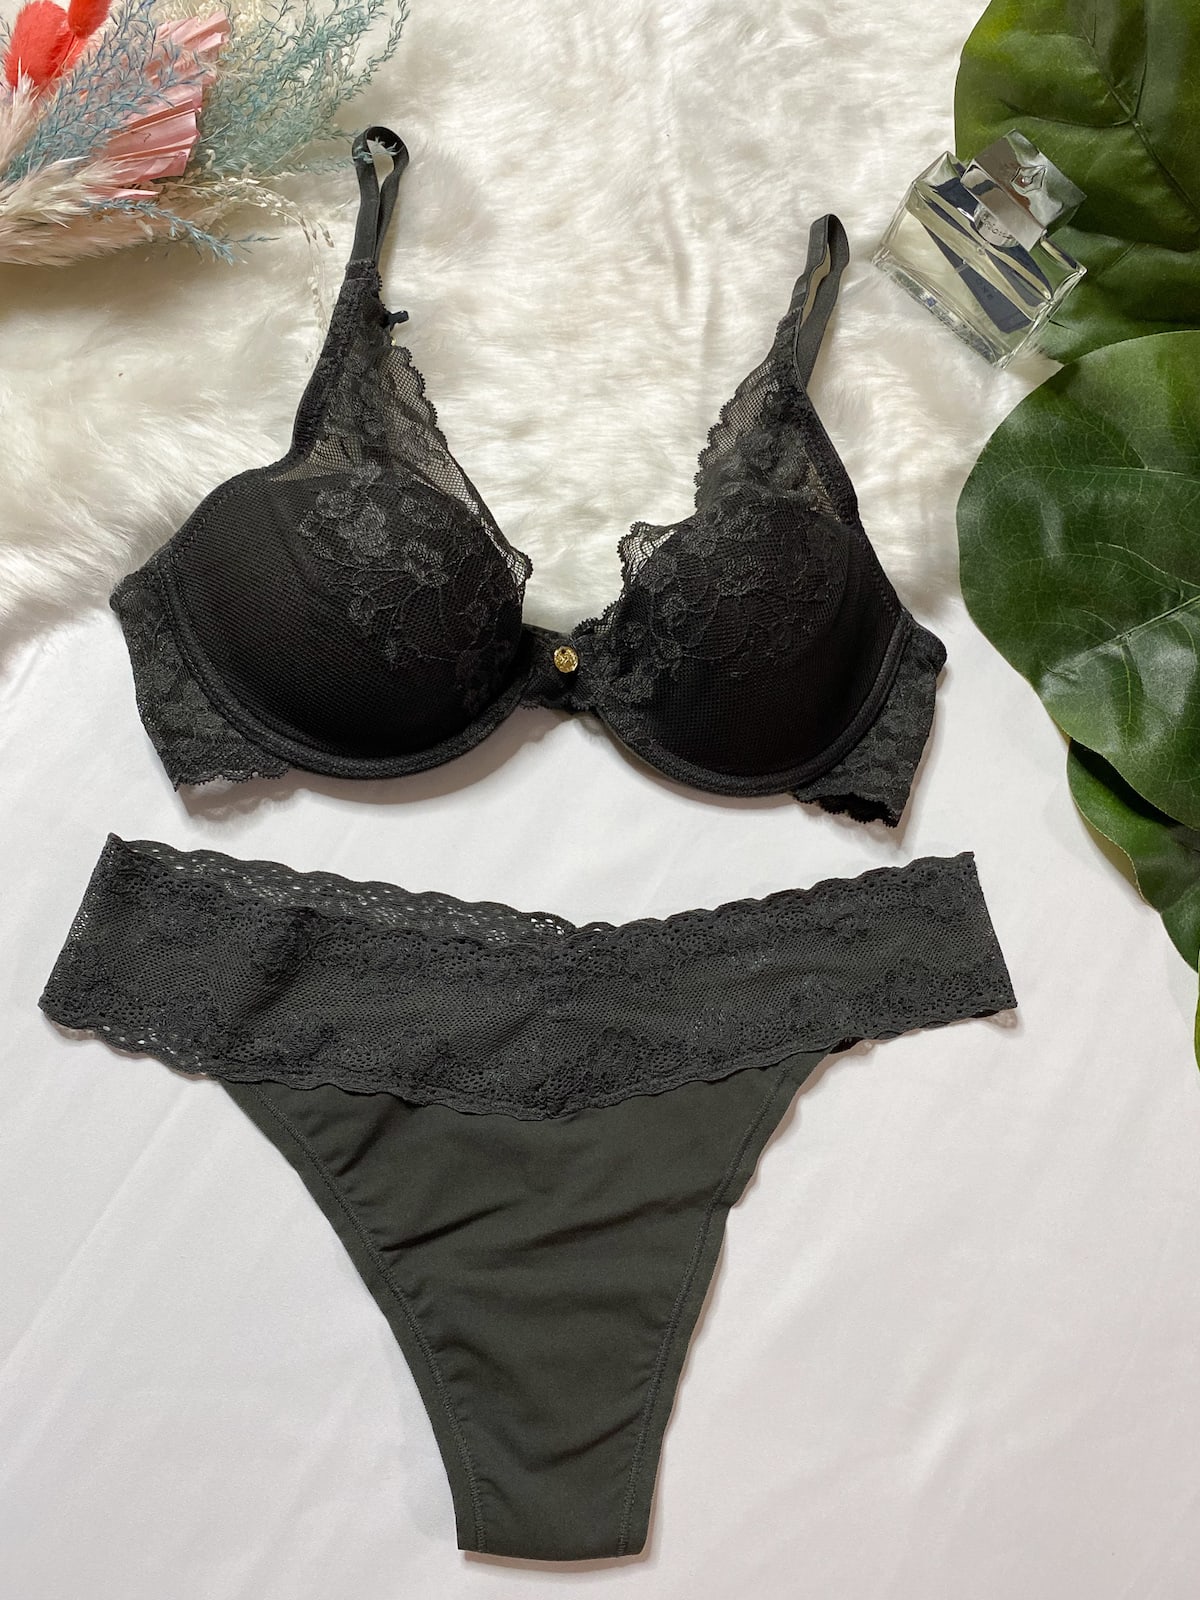 Nordstrom outdid themselves this year with these six BEST Nordstrom Anniversary Sale bras. Get these before they're gone!